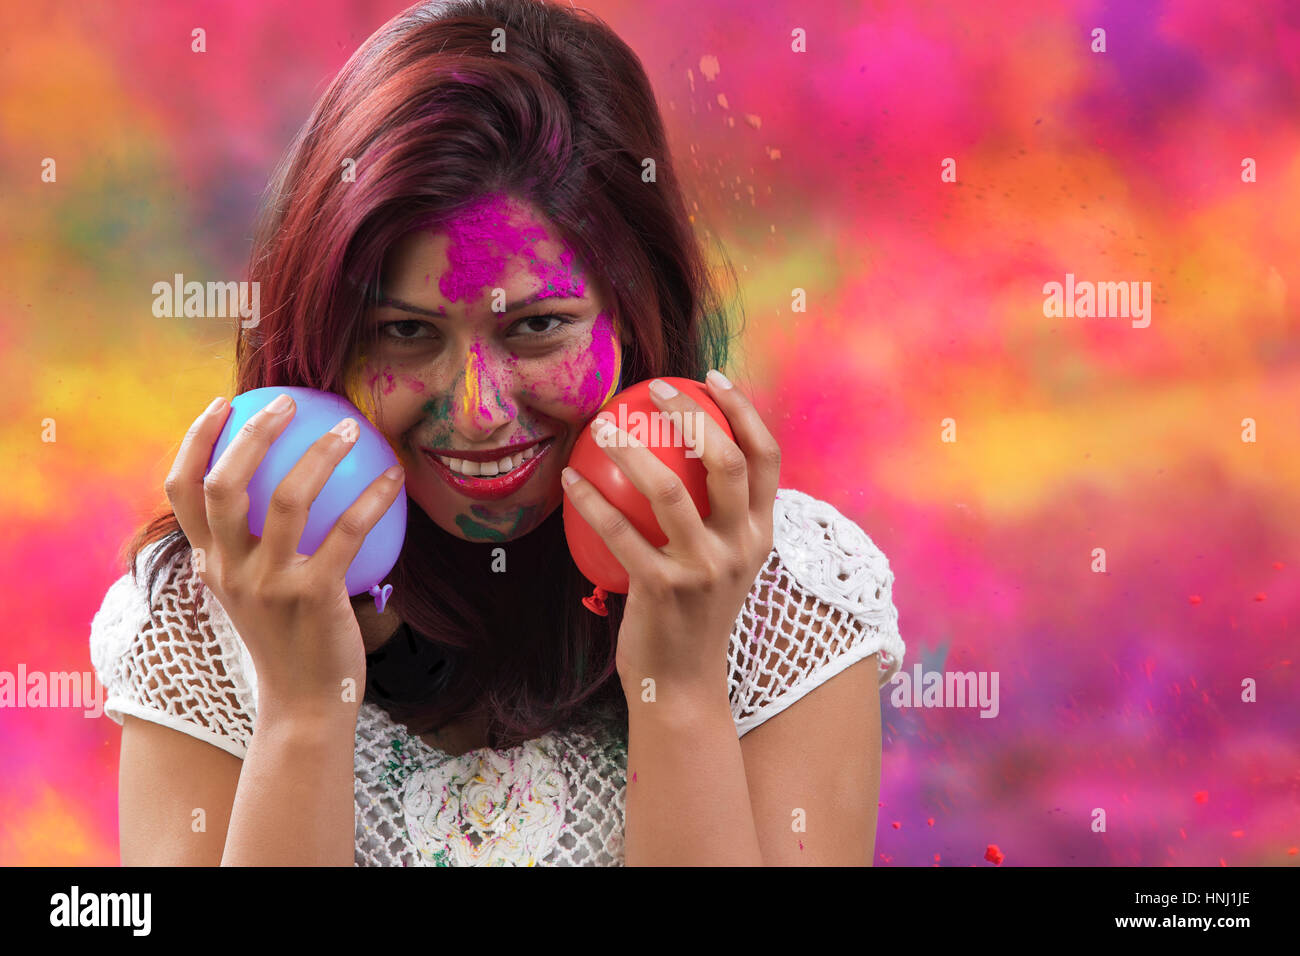 Indian Happy Young Girl With Holi Balloons at Holi Festival Stock ...